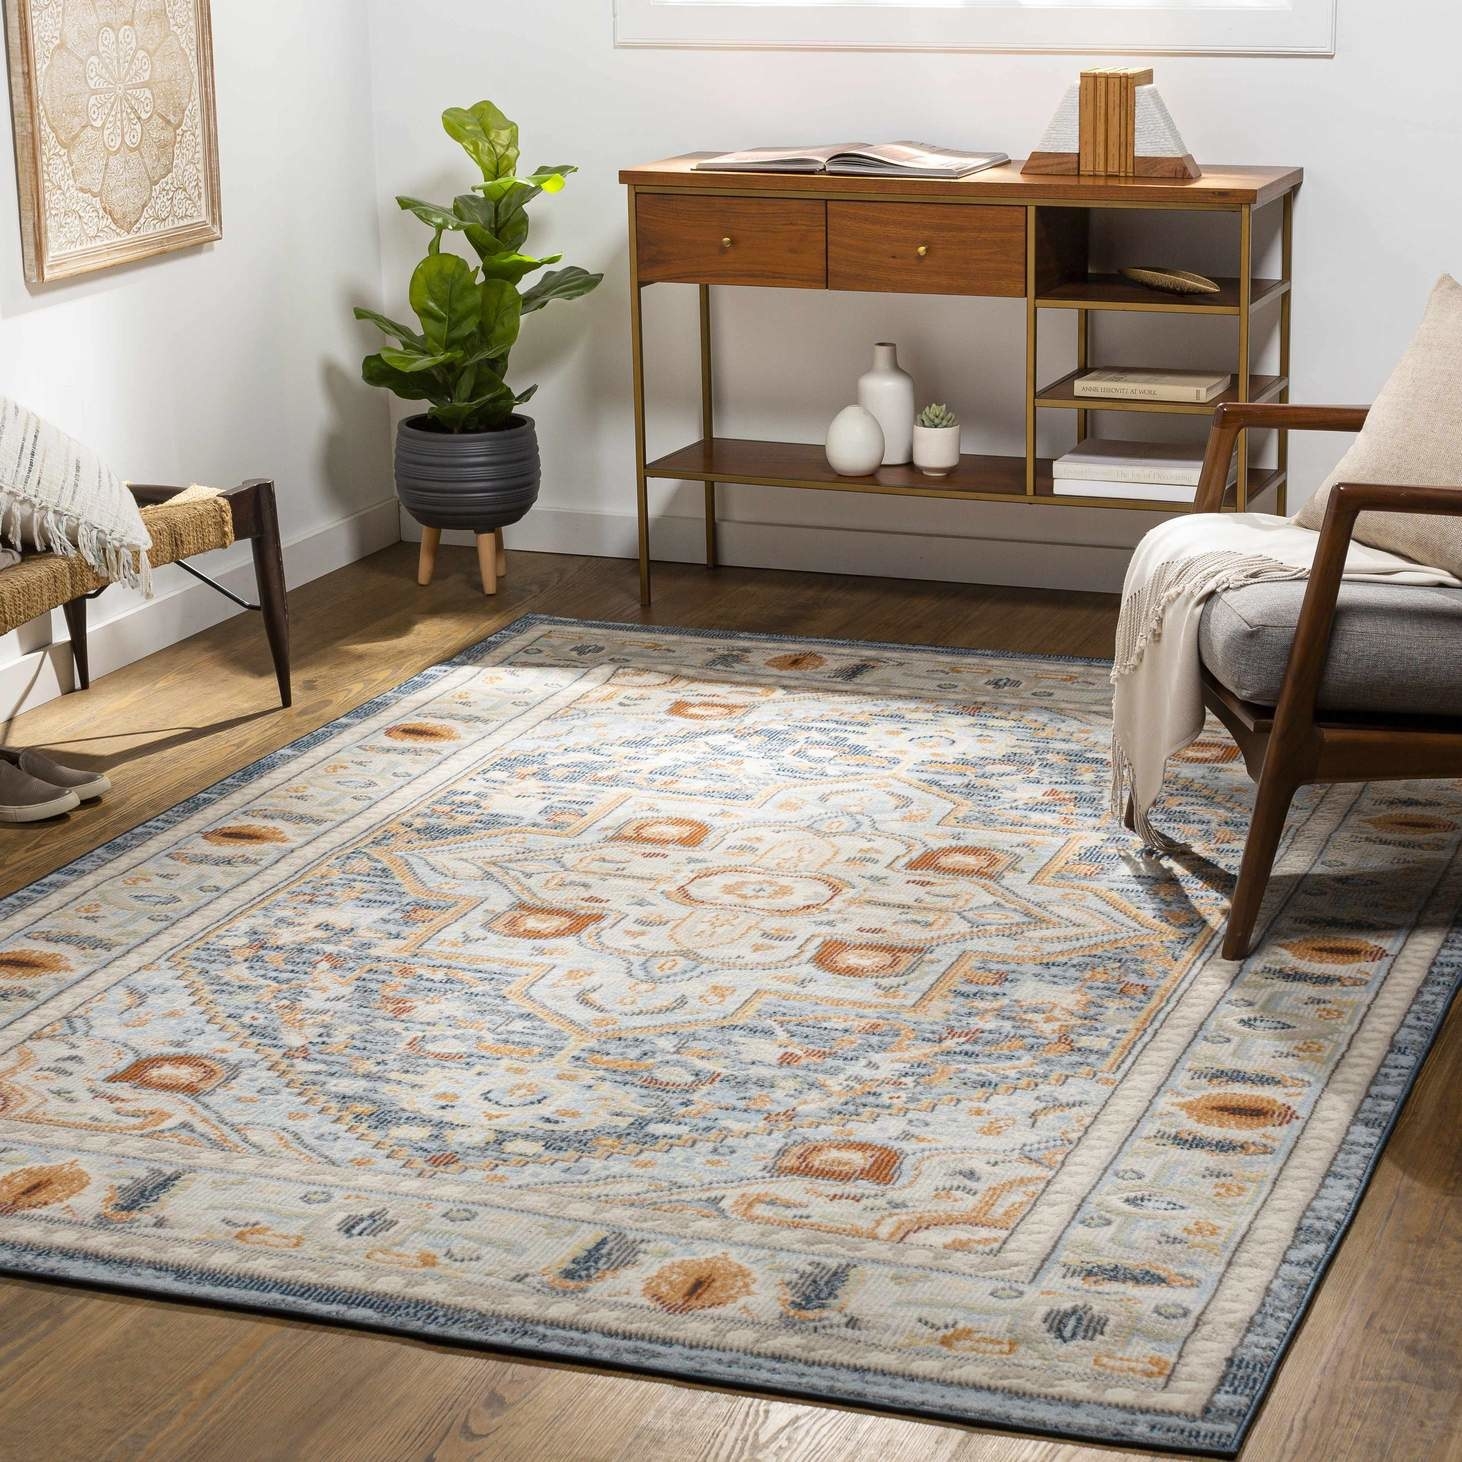 the blue, orange, gold, and cream area rug in a living room